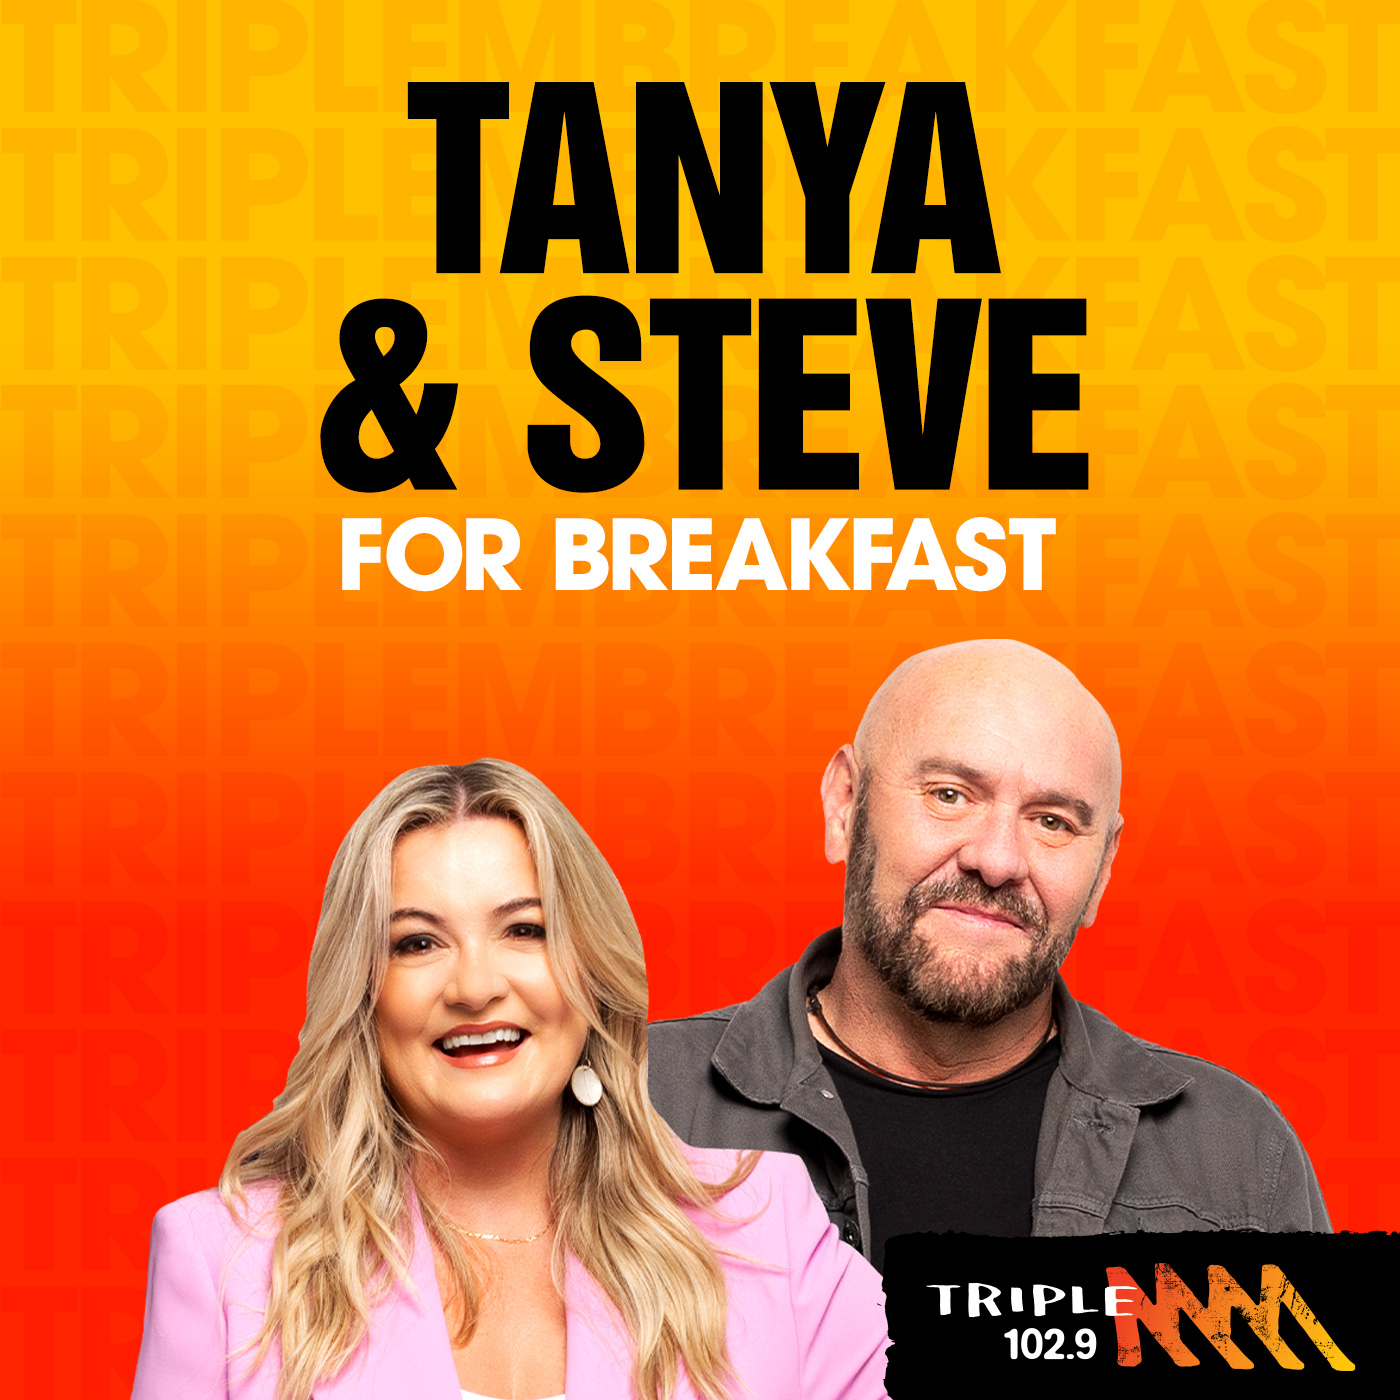 Matt McLaren joins Tanya and Steve to discuss his life being a musician and visually impaired